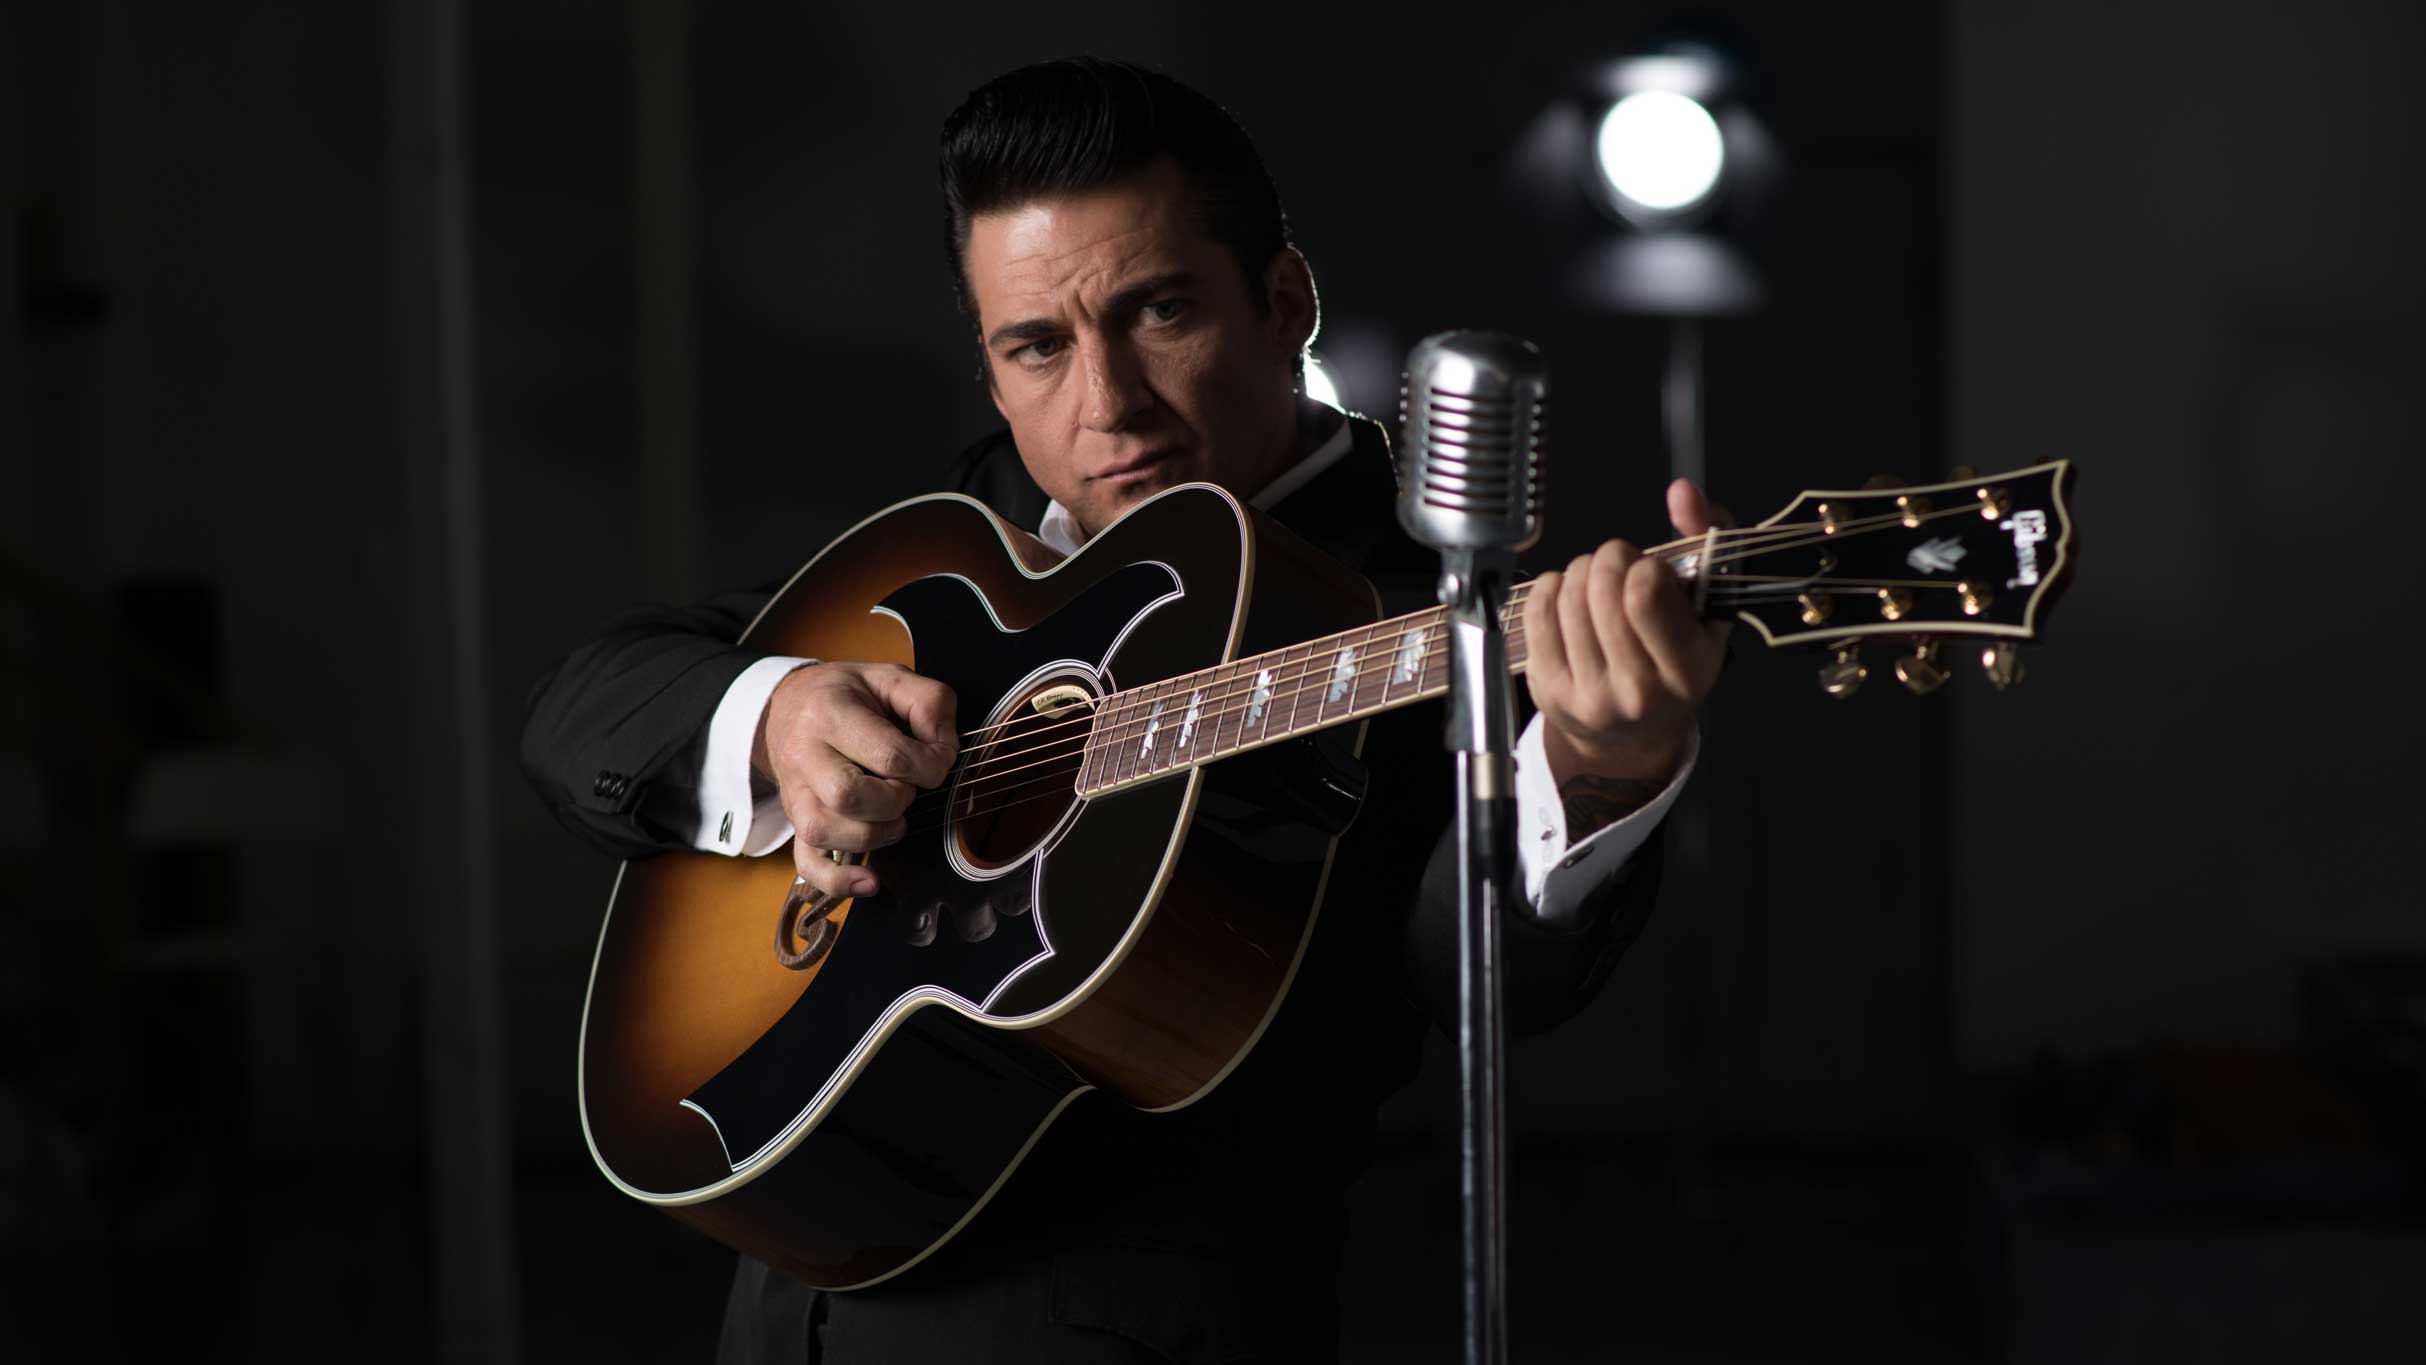 The Man in Black: A Tribute to Johnny Cash pre-sale password for genuine tickets in Red Bank